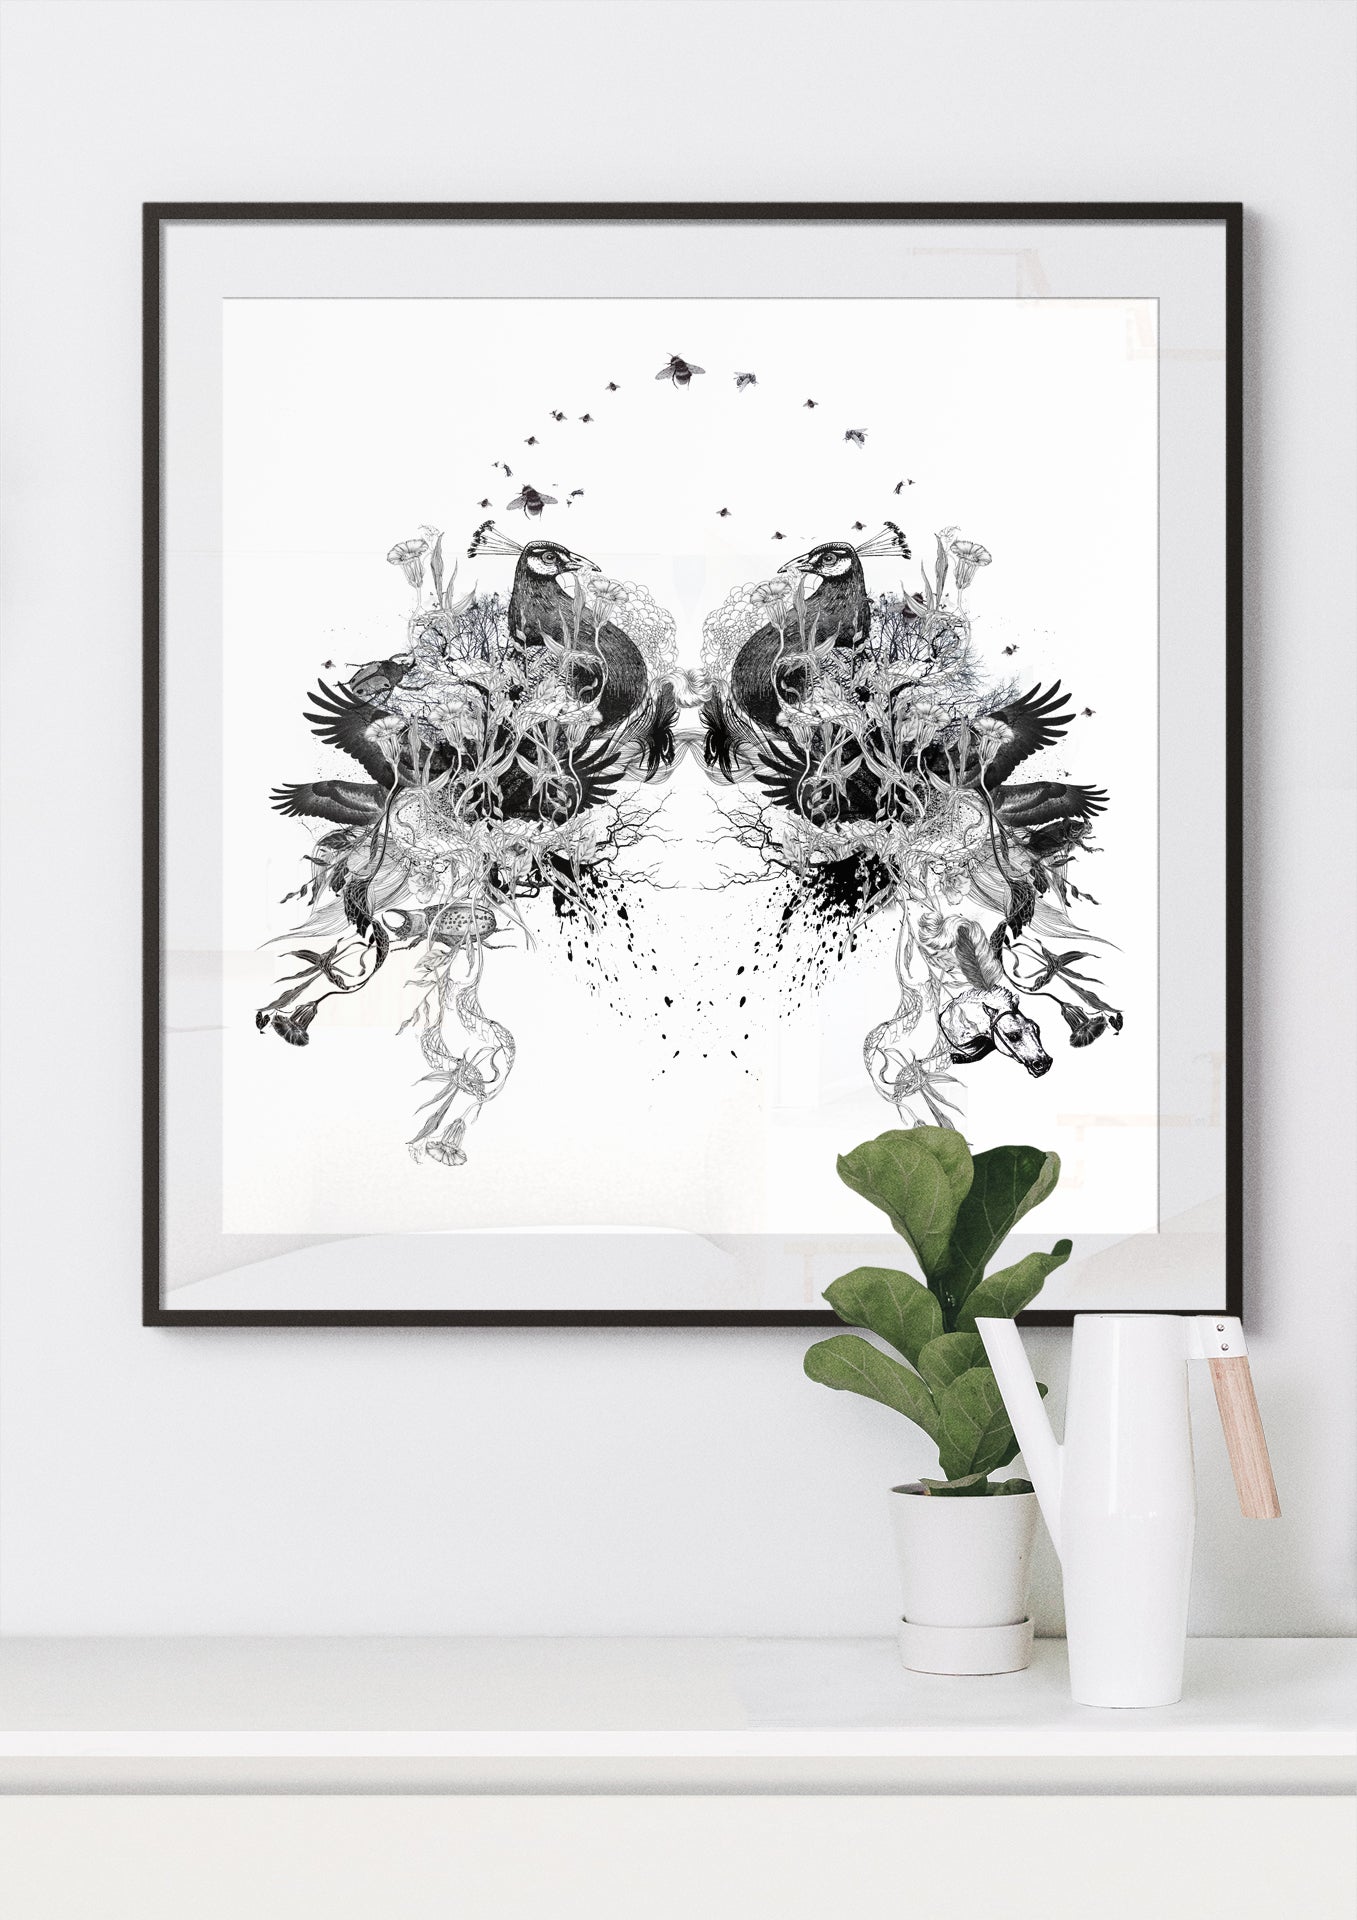 Limited Edition Print: Skull with Peacocks